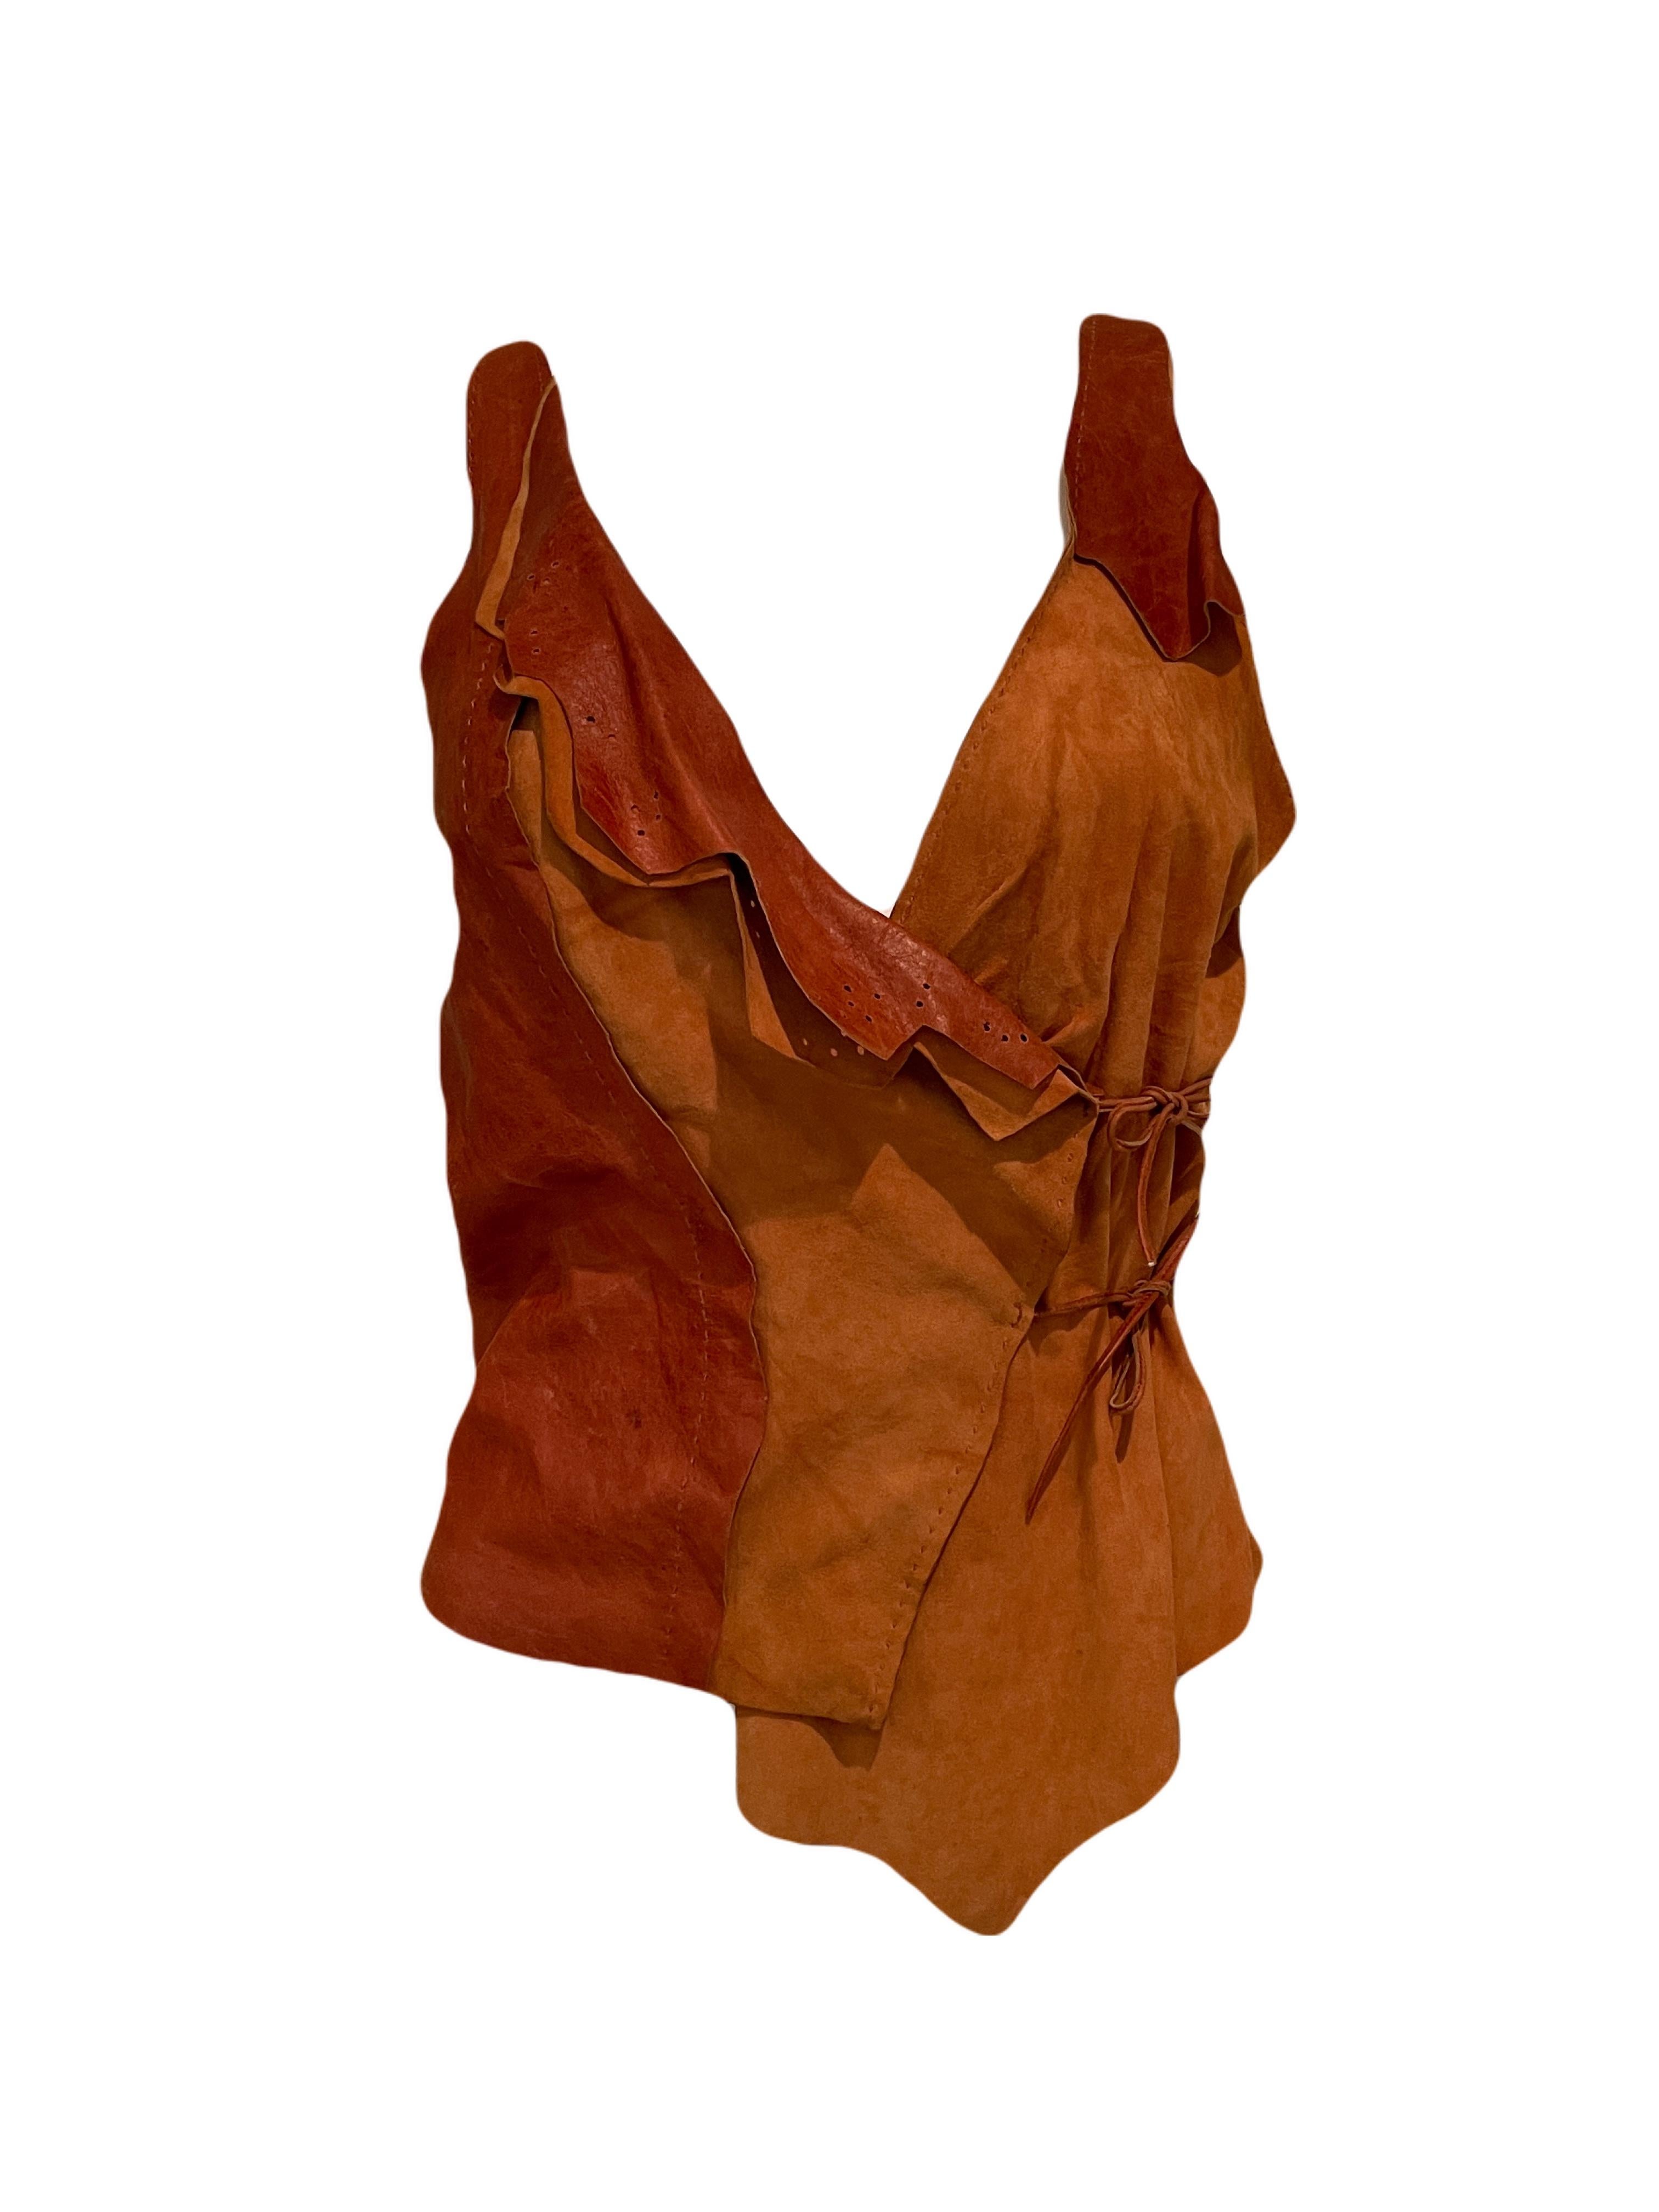 Vintage Plein Sud leather vest in excellent vintage condition. This brownish red orange vest can fit sizes XS - L. SEXY!!

Returns are only available to European customers per the law.